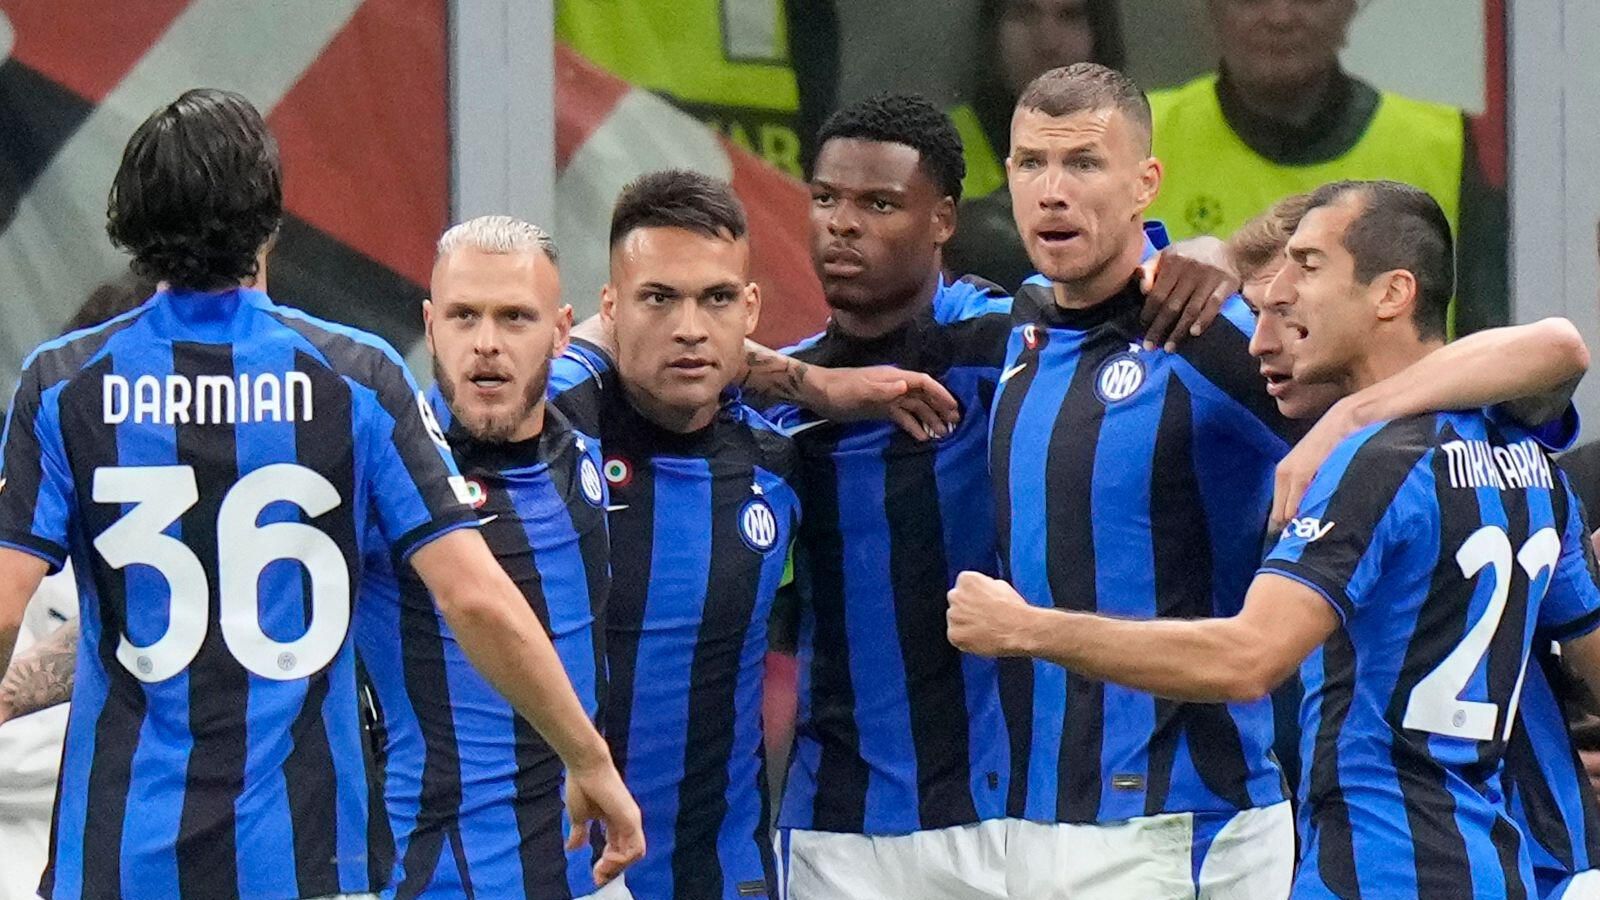 Inter Milan clinches 2-0 win over AC Milan in Champions League